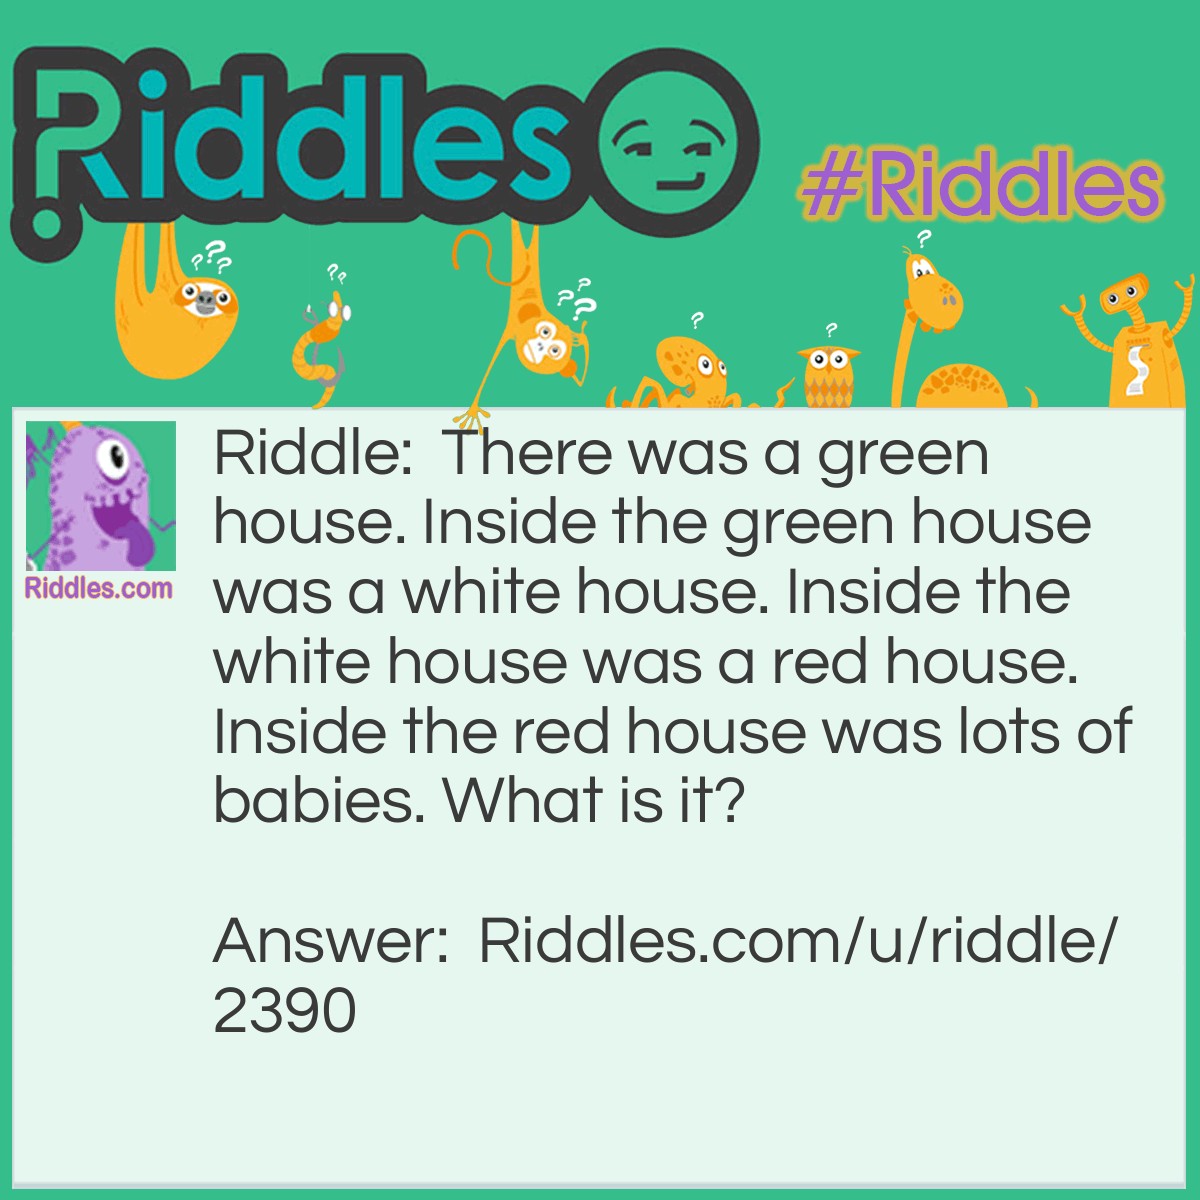 Riddle: There was a green house. Inside the green house was a white house. Inside the white house was a red house. Inside the red house was lots of babies. What is it? Answer: A watermelon.